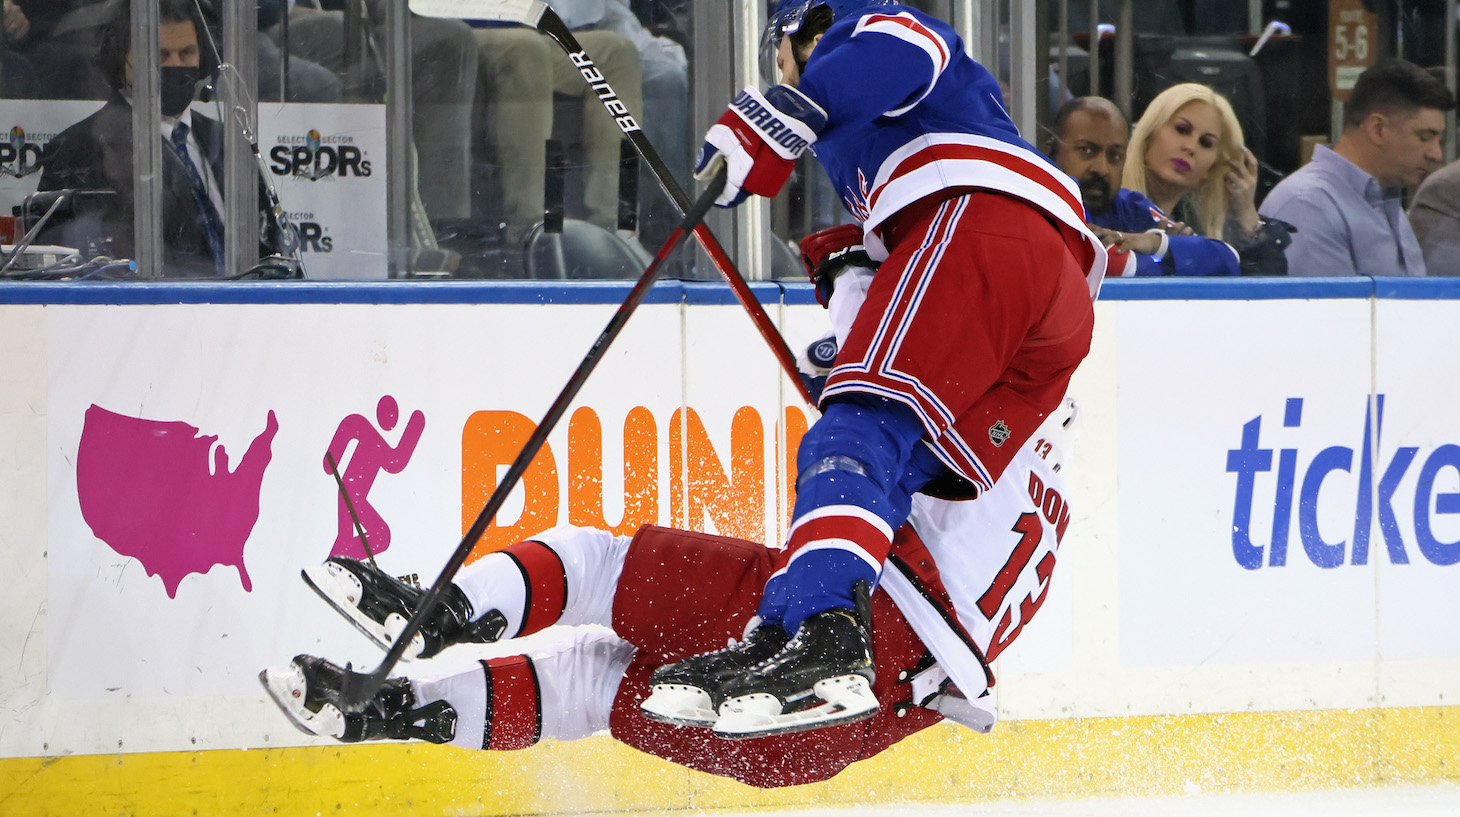 NEW YORK, NEW YORK - MAY 24: Max Domi #13 of the Carolina Hurricanes is checked by Jacob Trouba #8 of the New York Rangers during the first period in Game Four of the Second Round of the 2022 Stanley Cup Playoffs at Madison Square Garden on May 24, 2022 in New York City. (Photo by Bruce Bennett/Getty Images)